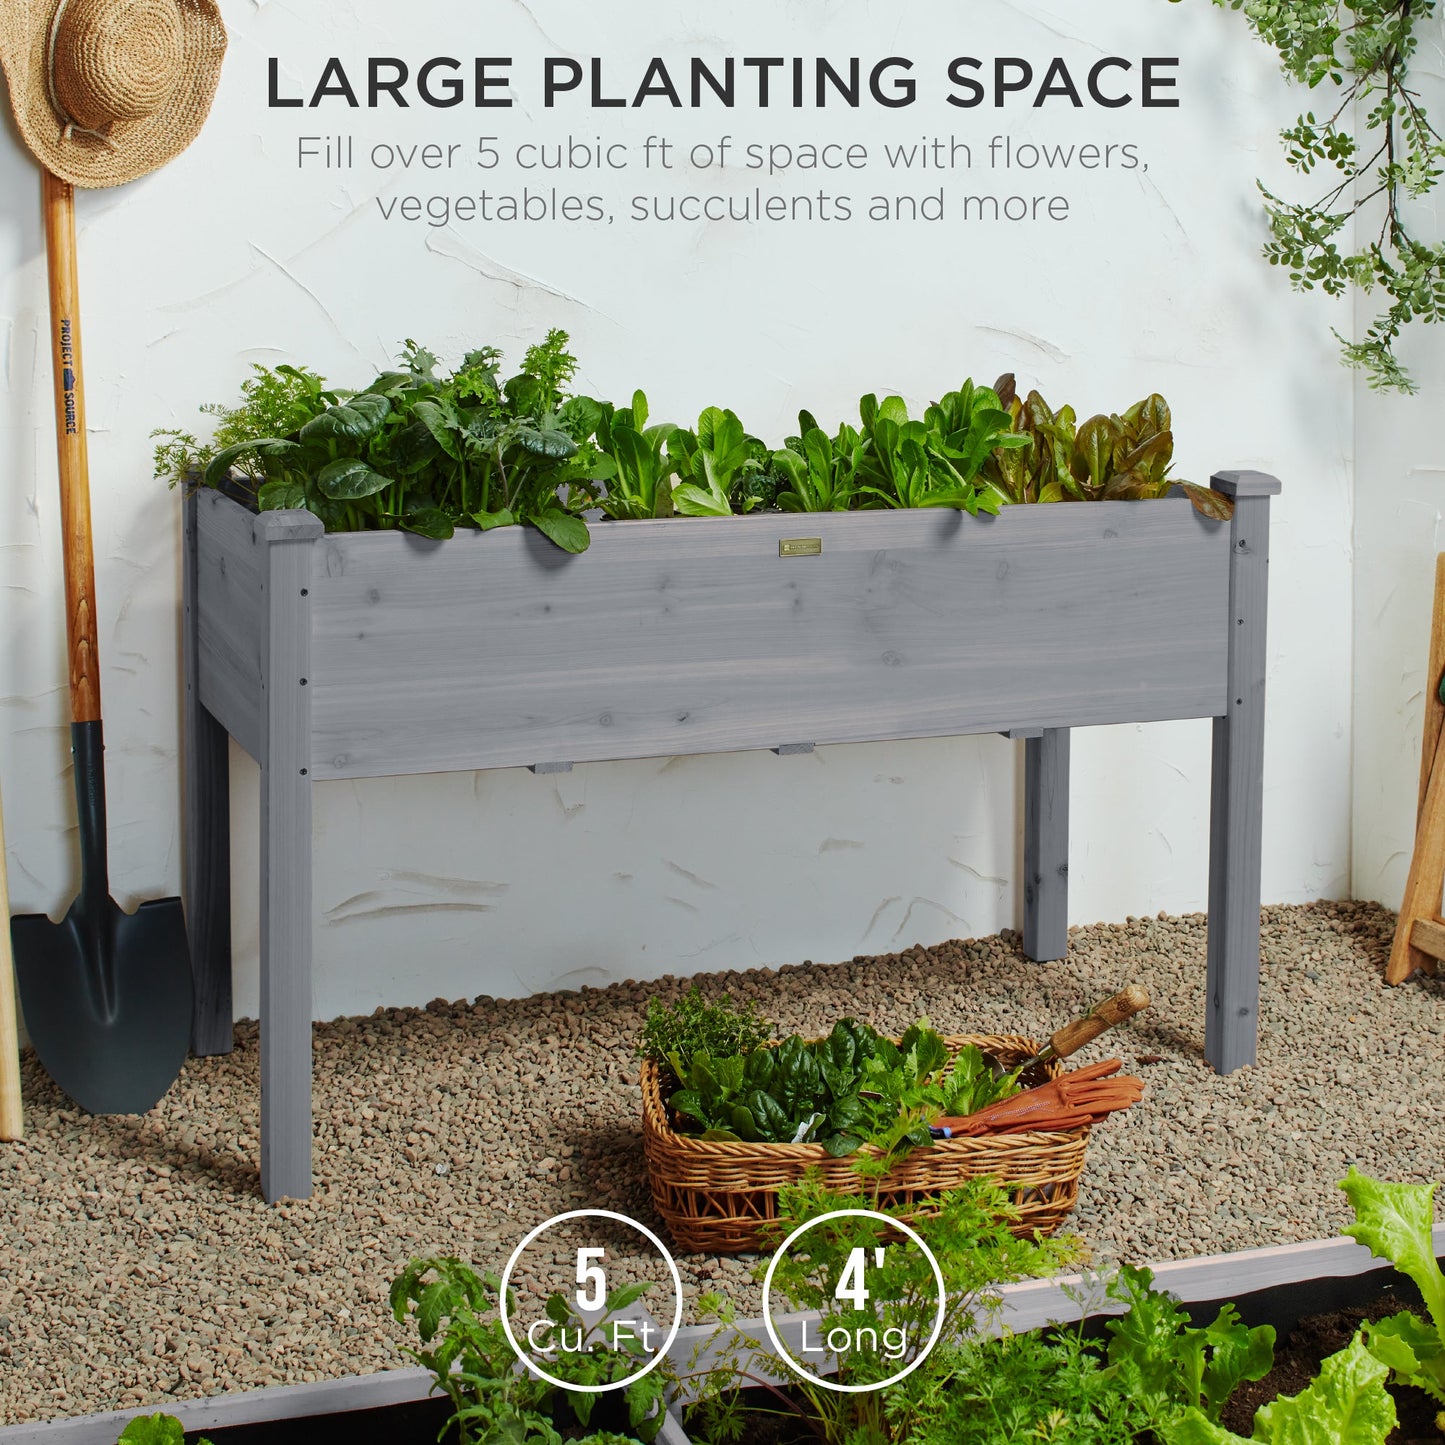 Raised Garden Bed, Elevated Wooden Planter Box w/ Foot Caps - 48x24x30in